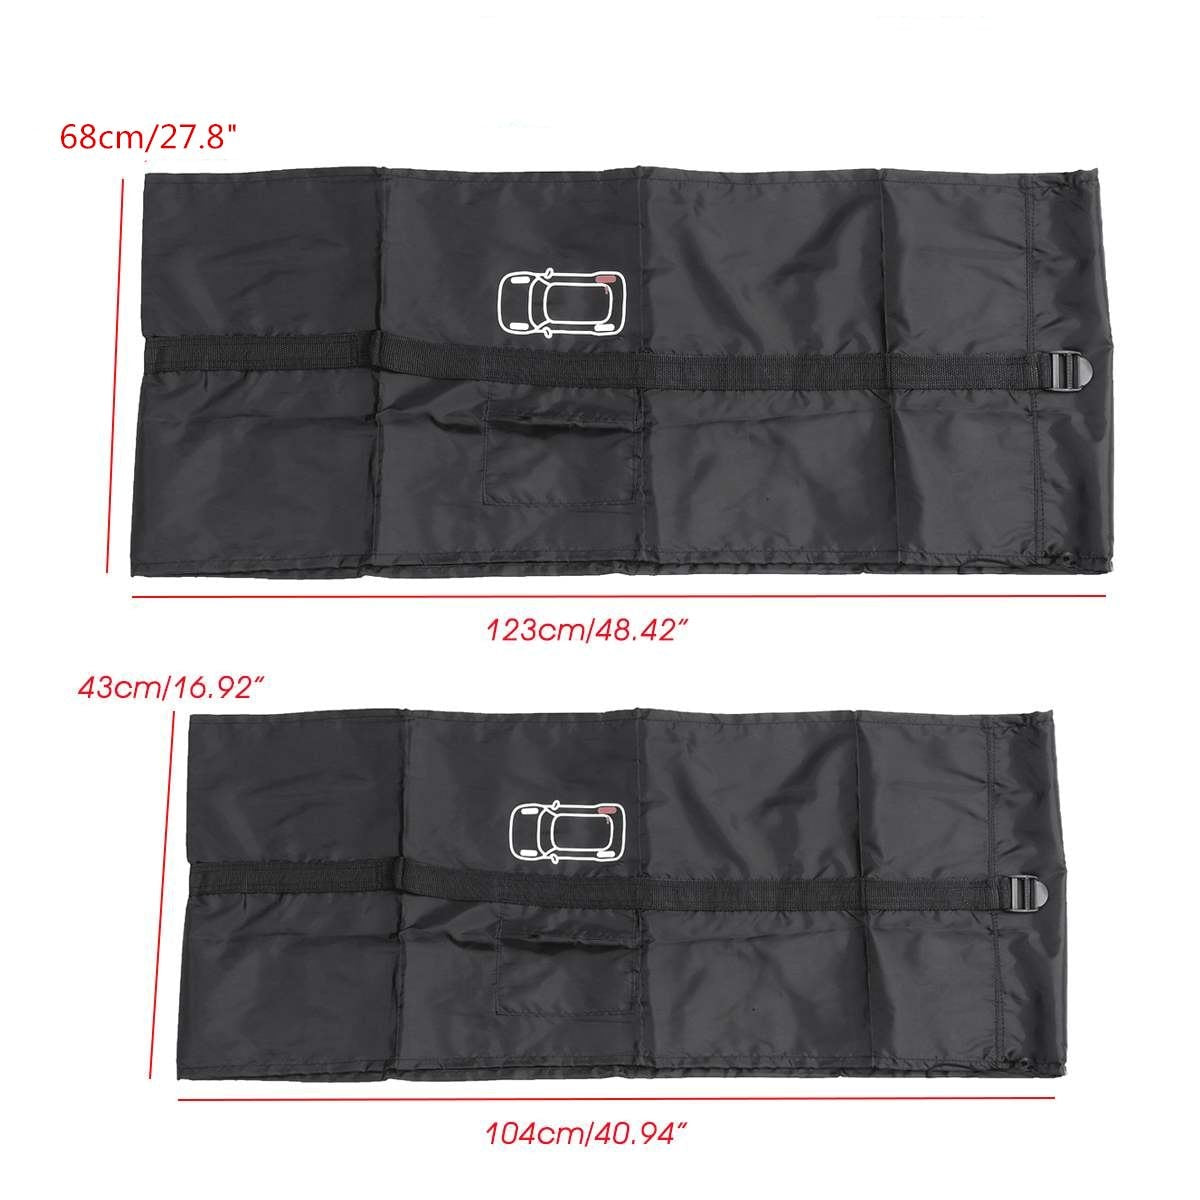 1/2/4pcs Universal Car Spare Tire Covers Case Tires Storage Bags Auto Wheel Tires Storage Bags Tyre Waterproof Polyester Bag